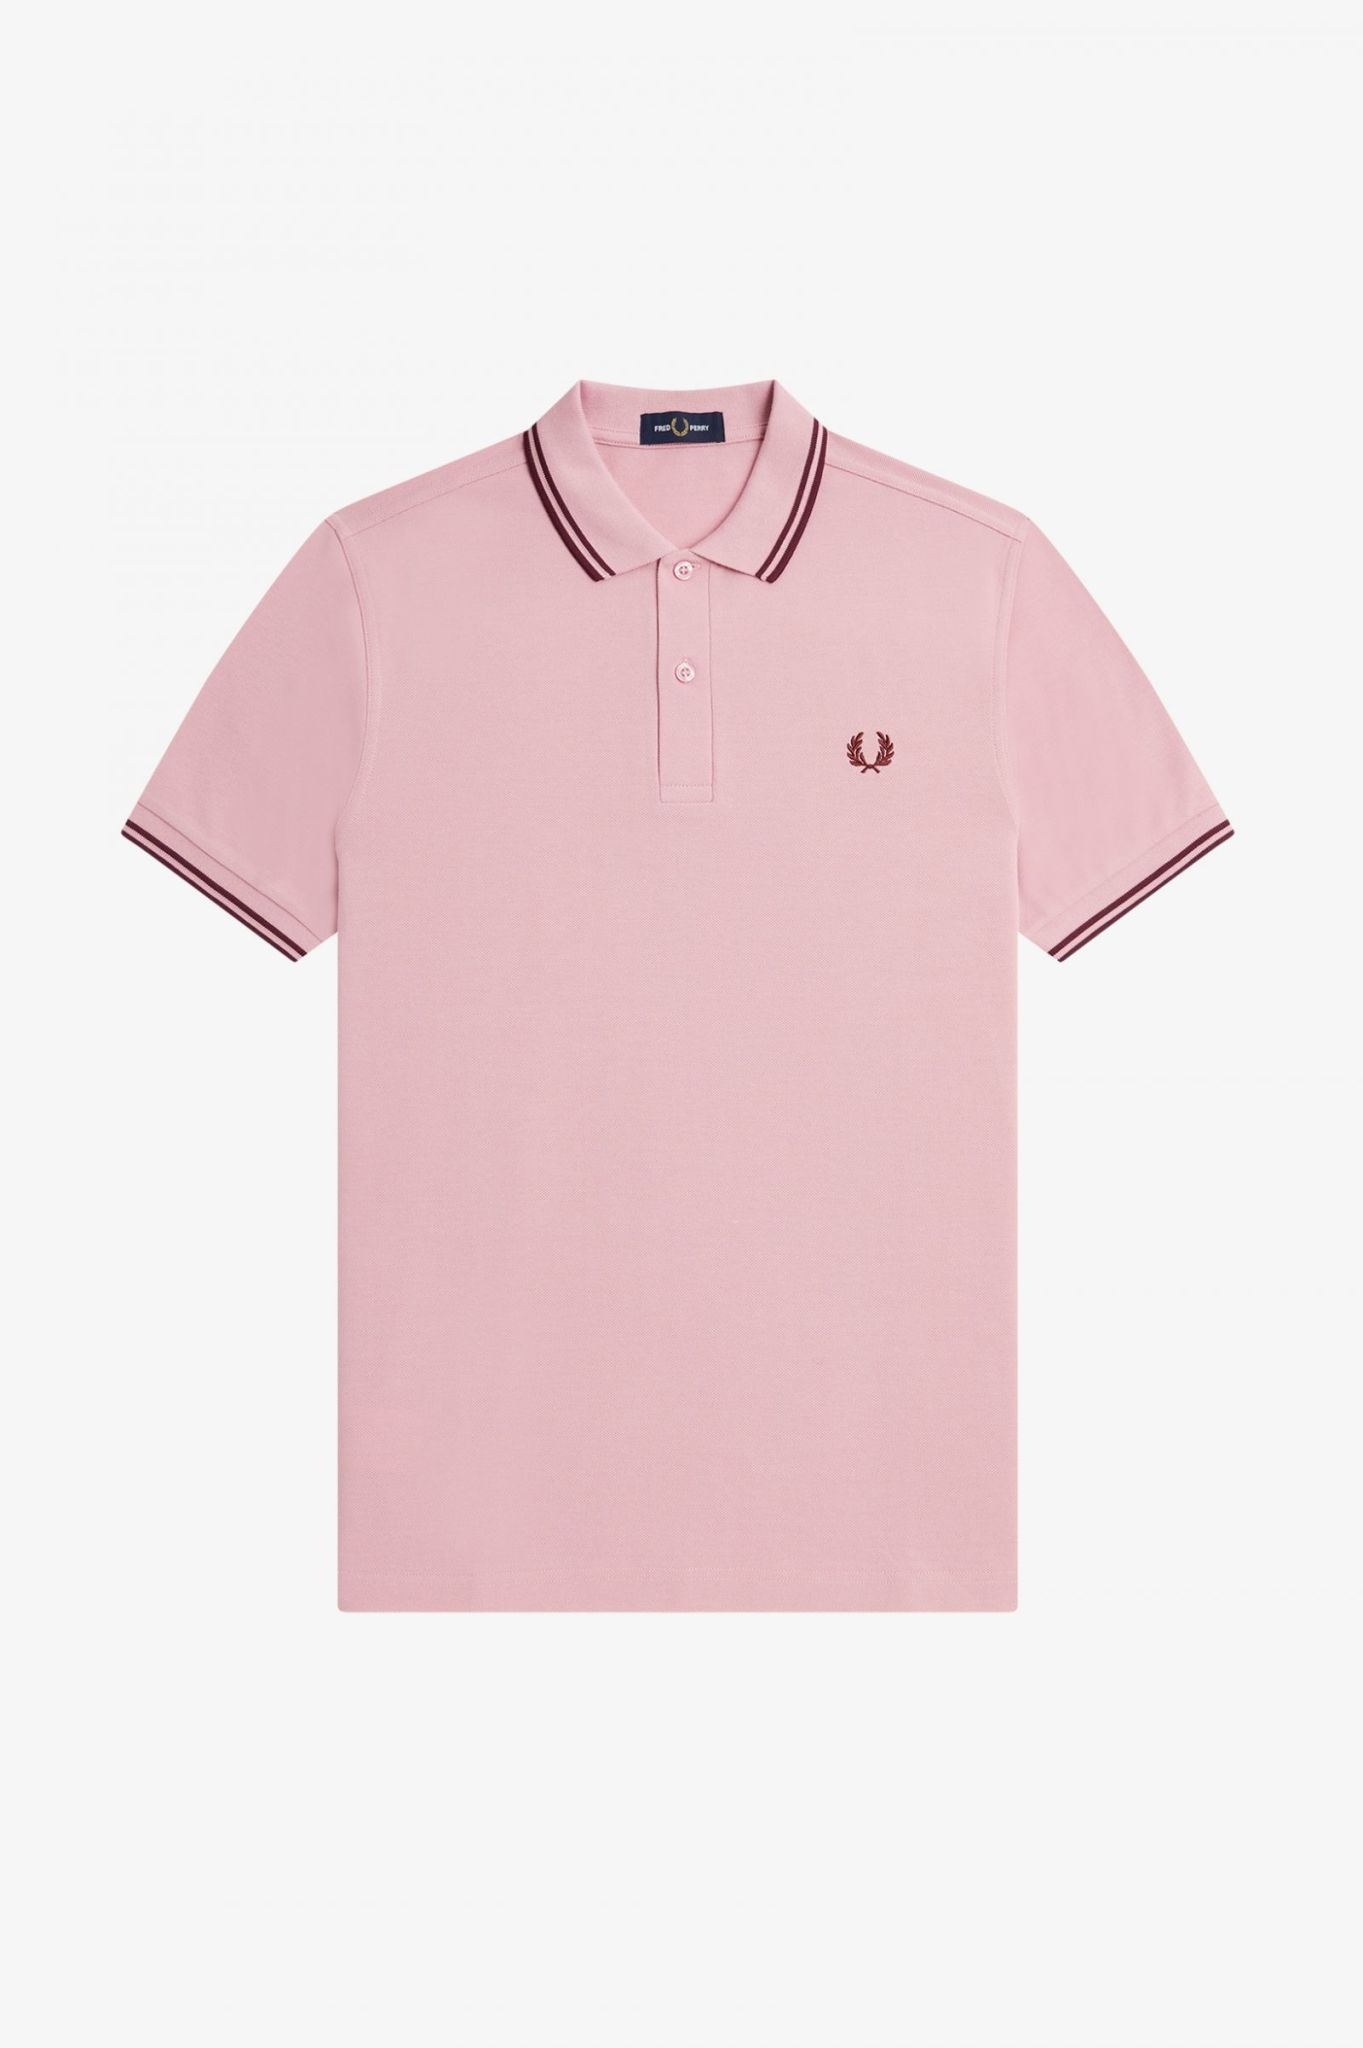 Twin Tipped Fred Perry Shirt in Chalky Pink/Oxblood/Oxblood - Eastwood ...